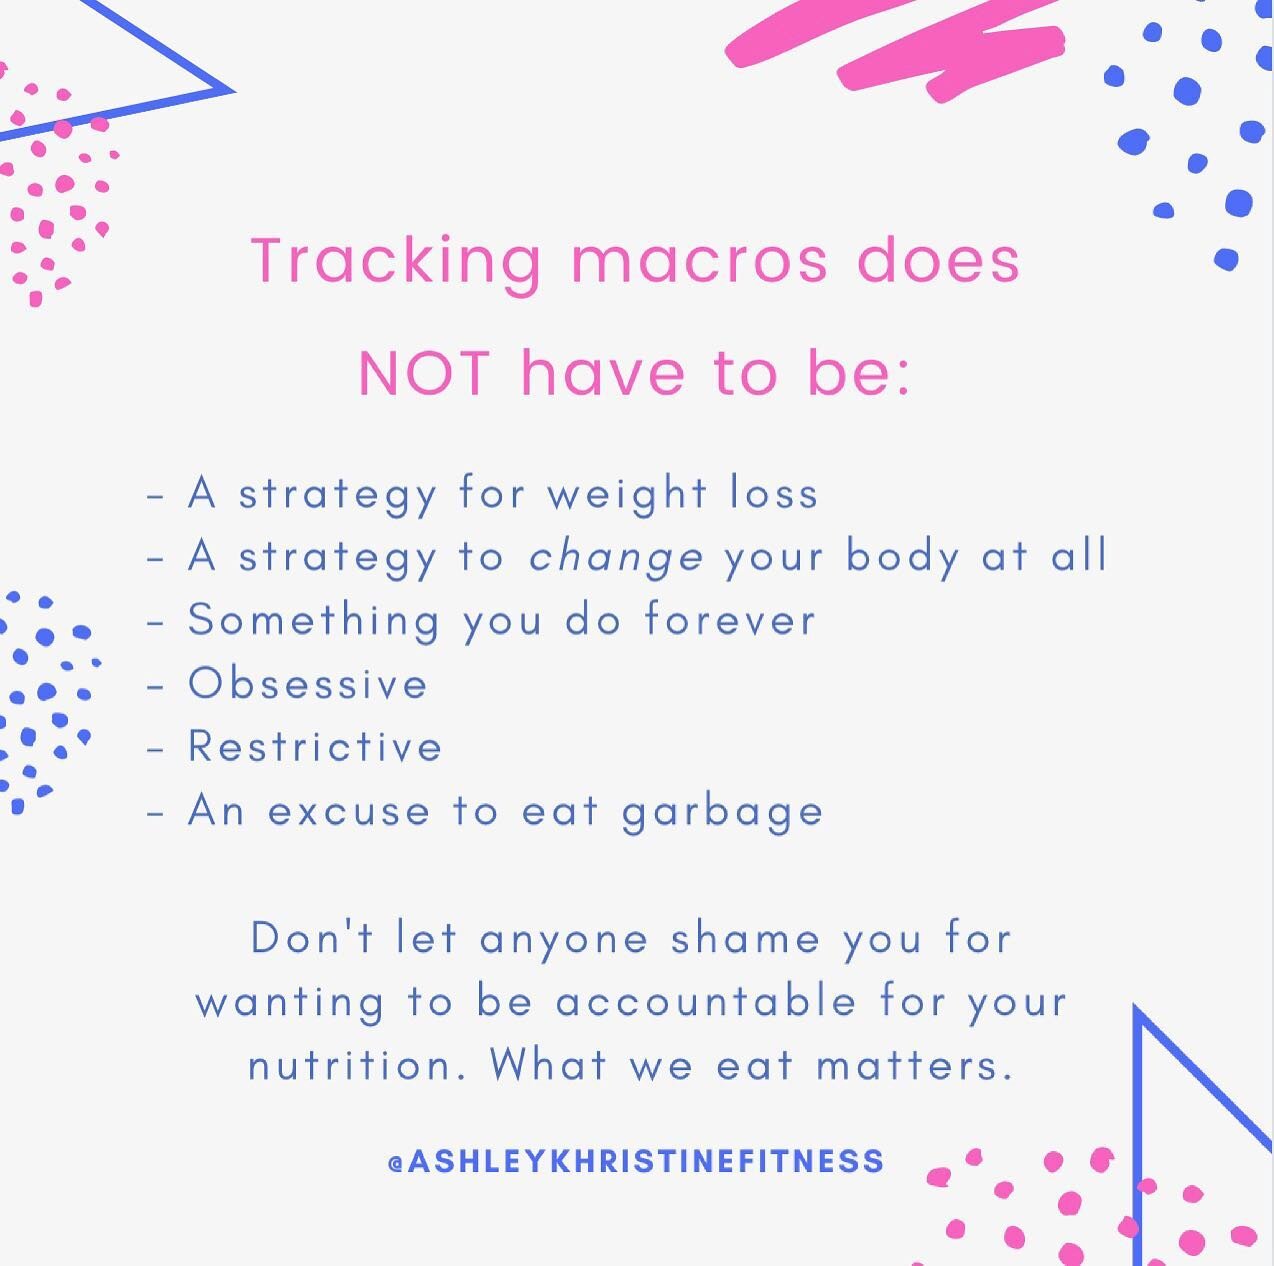 1. I don&rsquo;t track macros every day. Not at all.
⠀⠀⠀⠀⠀⠀⠀⠀⠀
I teach my clients how to use knowledge of macro nutrition as a TOOL to become more self-aware and achieve whatever goal they have.
⠀⠀⠀⠀⠀⠀⠀⠀⠀
&amp; Then how to transition away from daily 